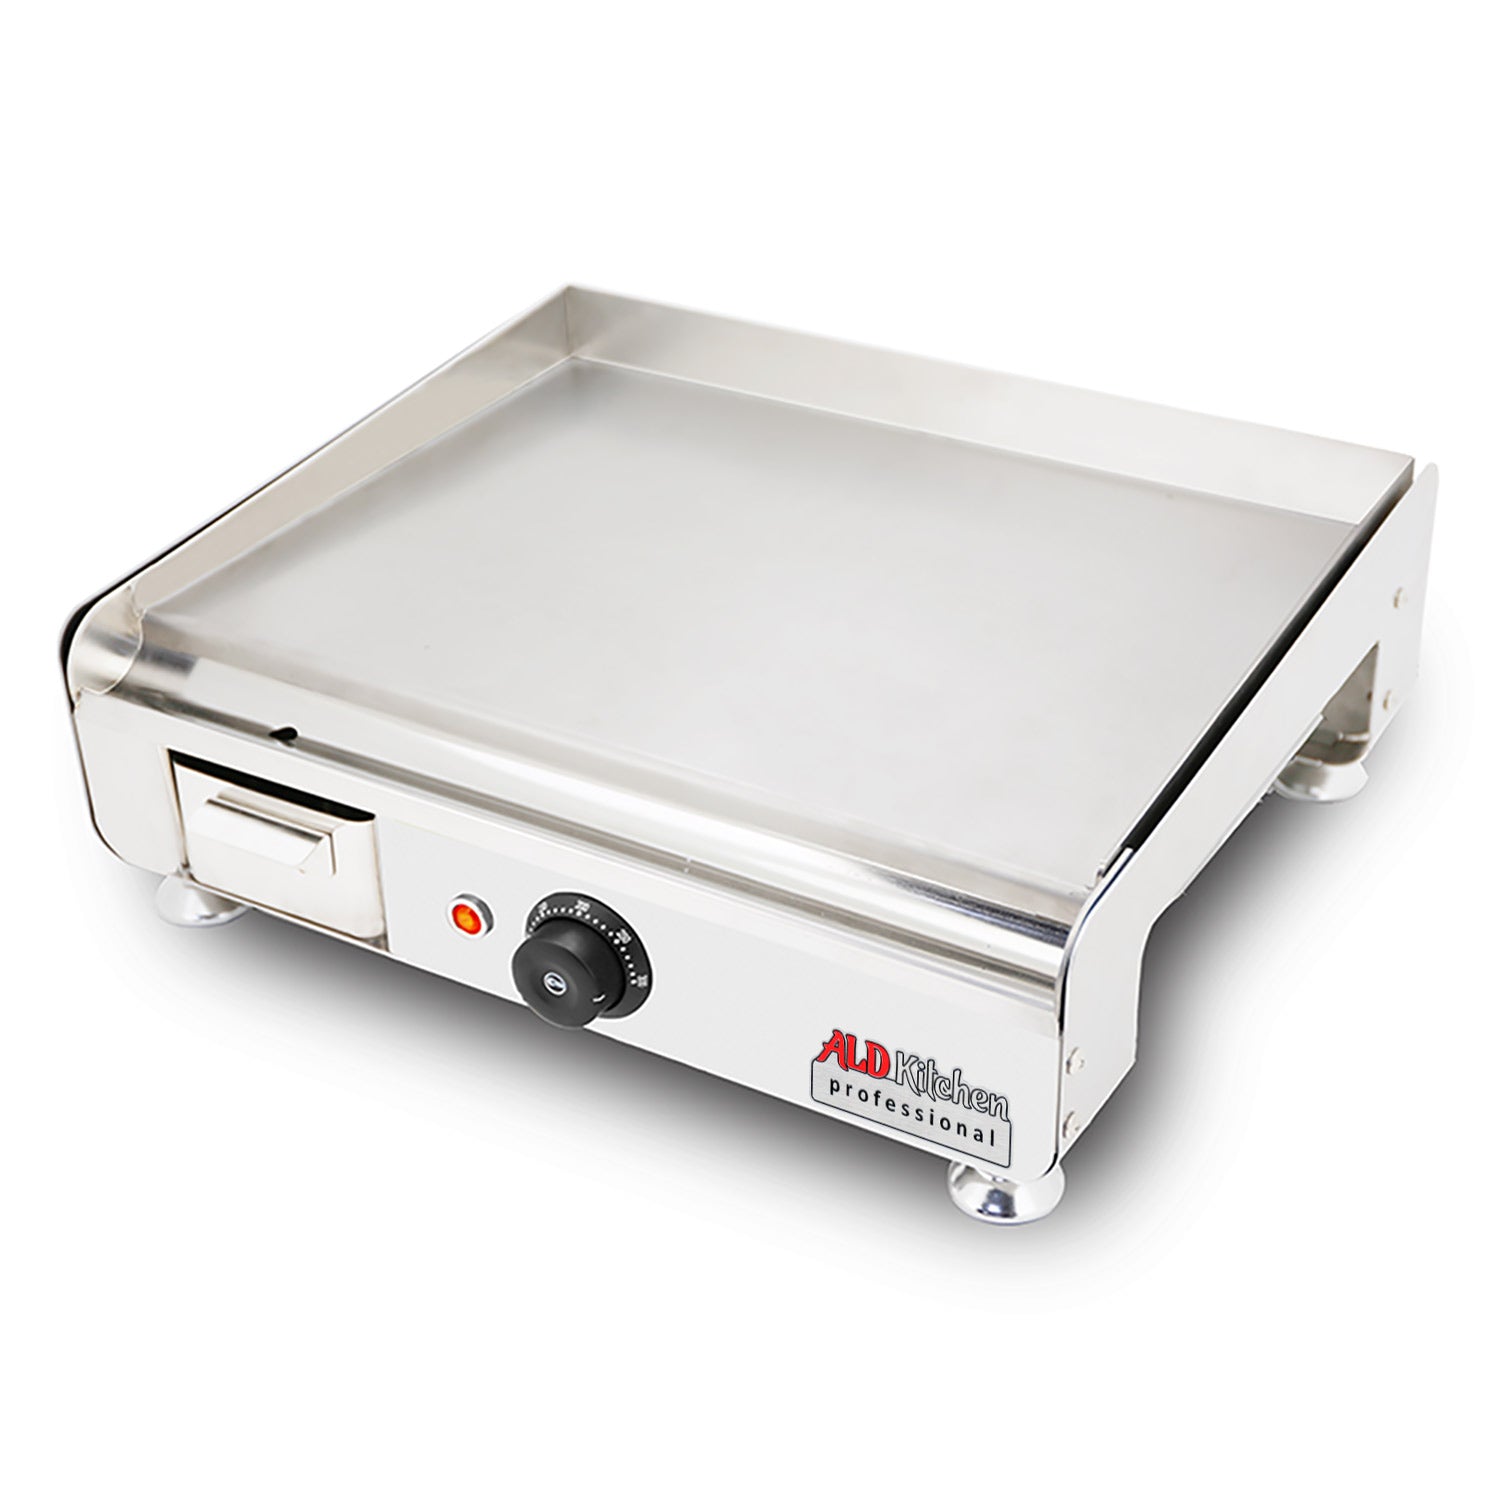 ALDKitchen Flat Top Griddle | Teppanyaki Grill with Manual Control | 110V